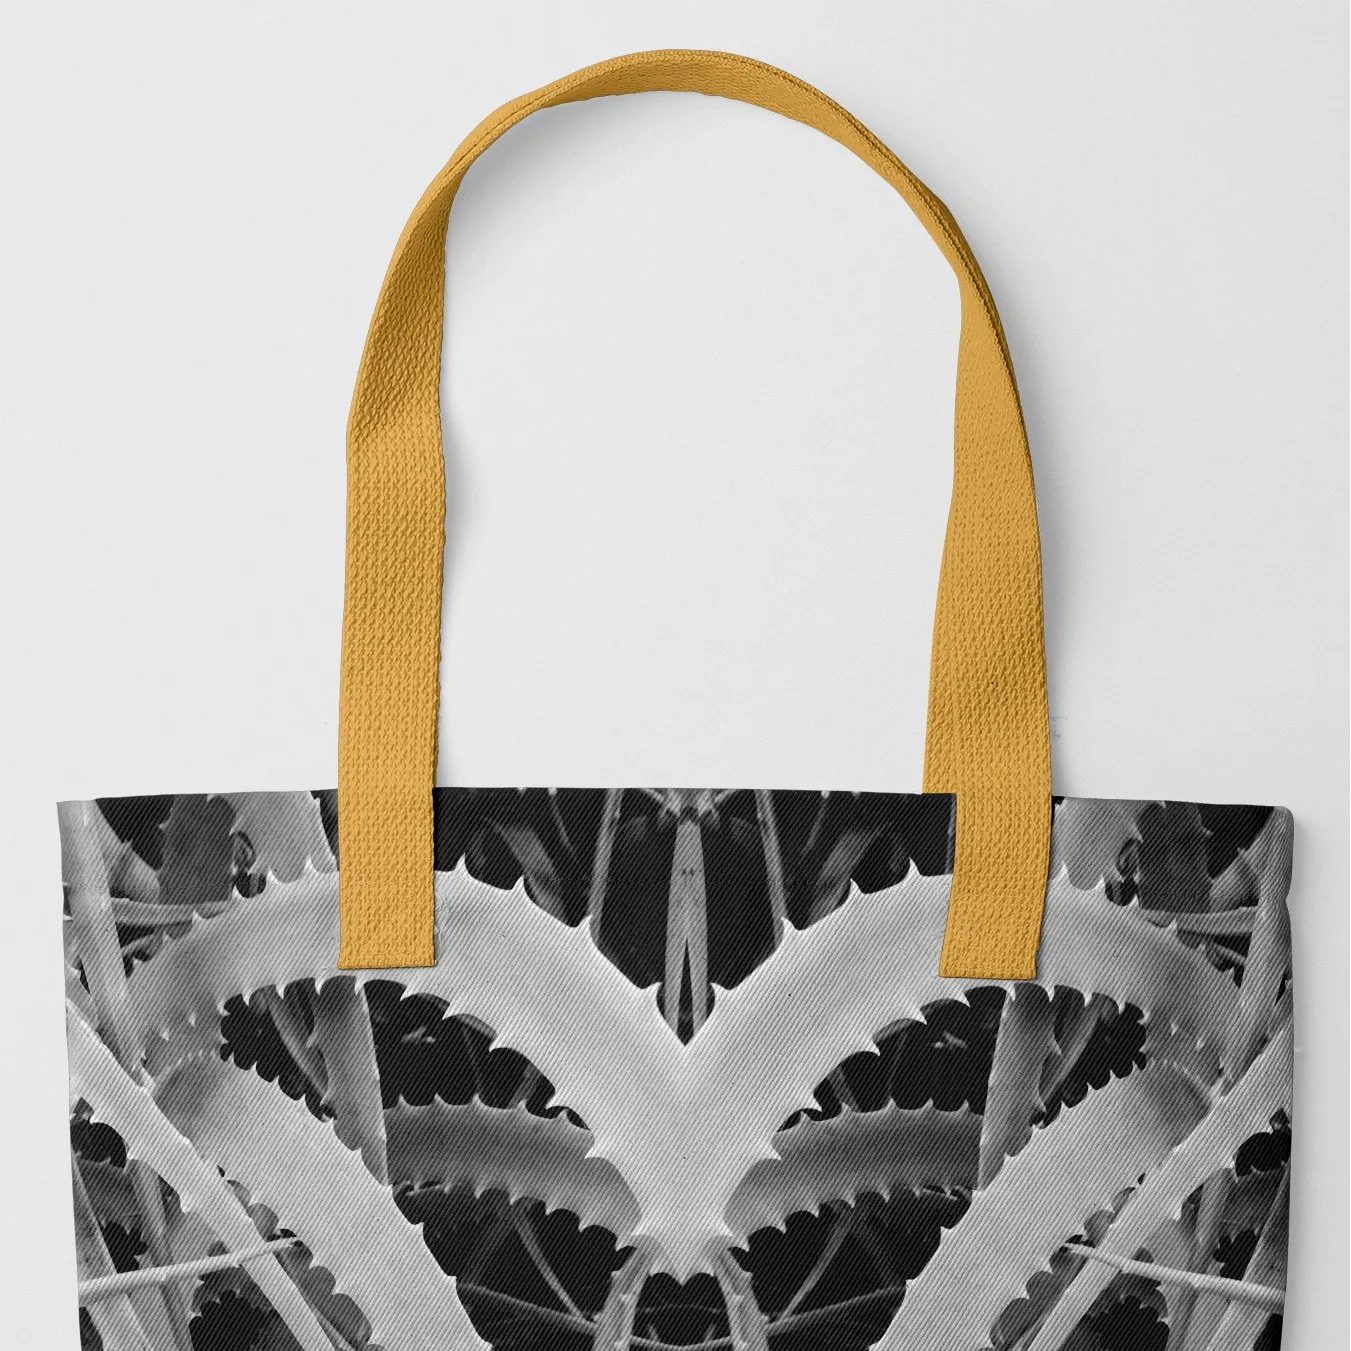 Spiked Tote - Black And White - Heavy Duty Reusable Grocery Bag - Yellow Handles - Shopping Totes - Aesthetic Art